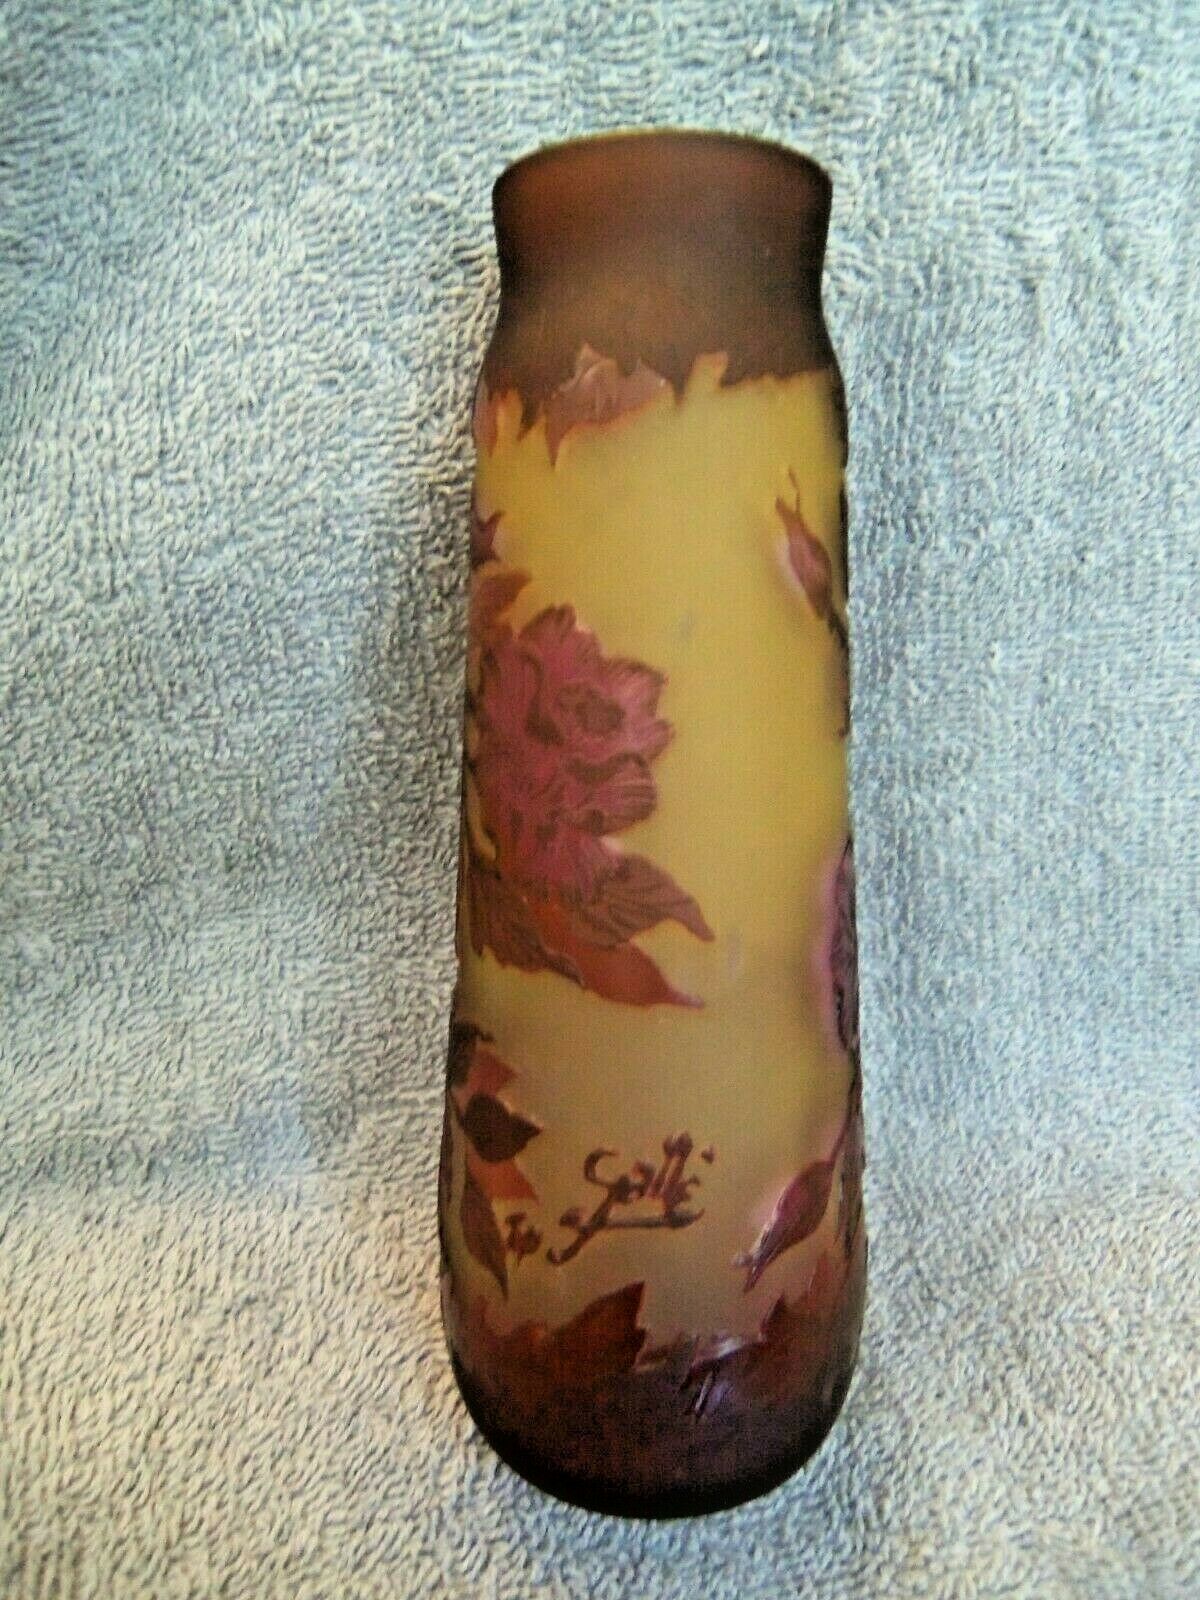 Galle Tip French Art Nouveau Cameo Glass Vase Floral Motif 6 7/8" Tall Signed